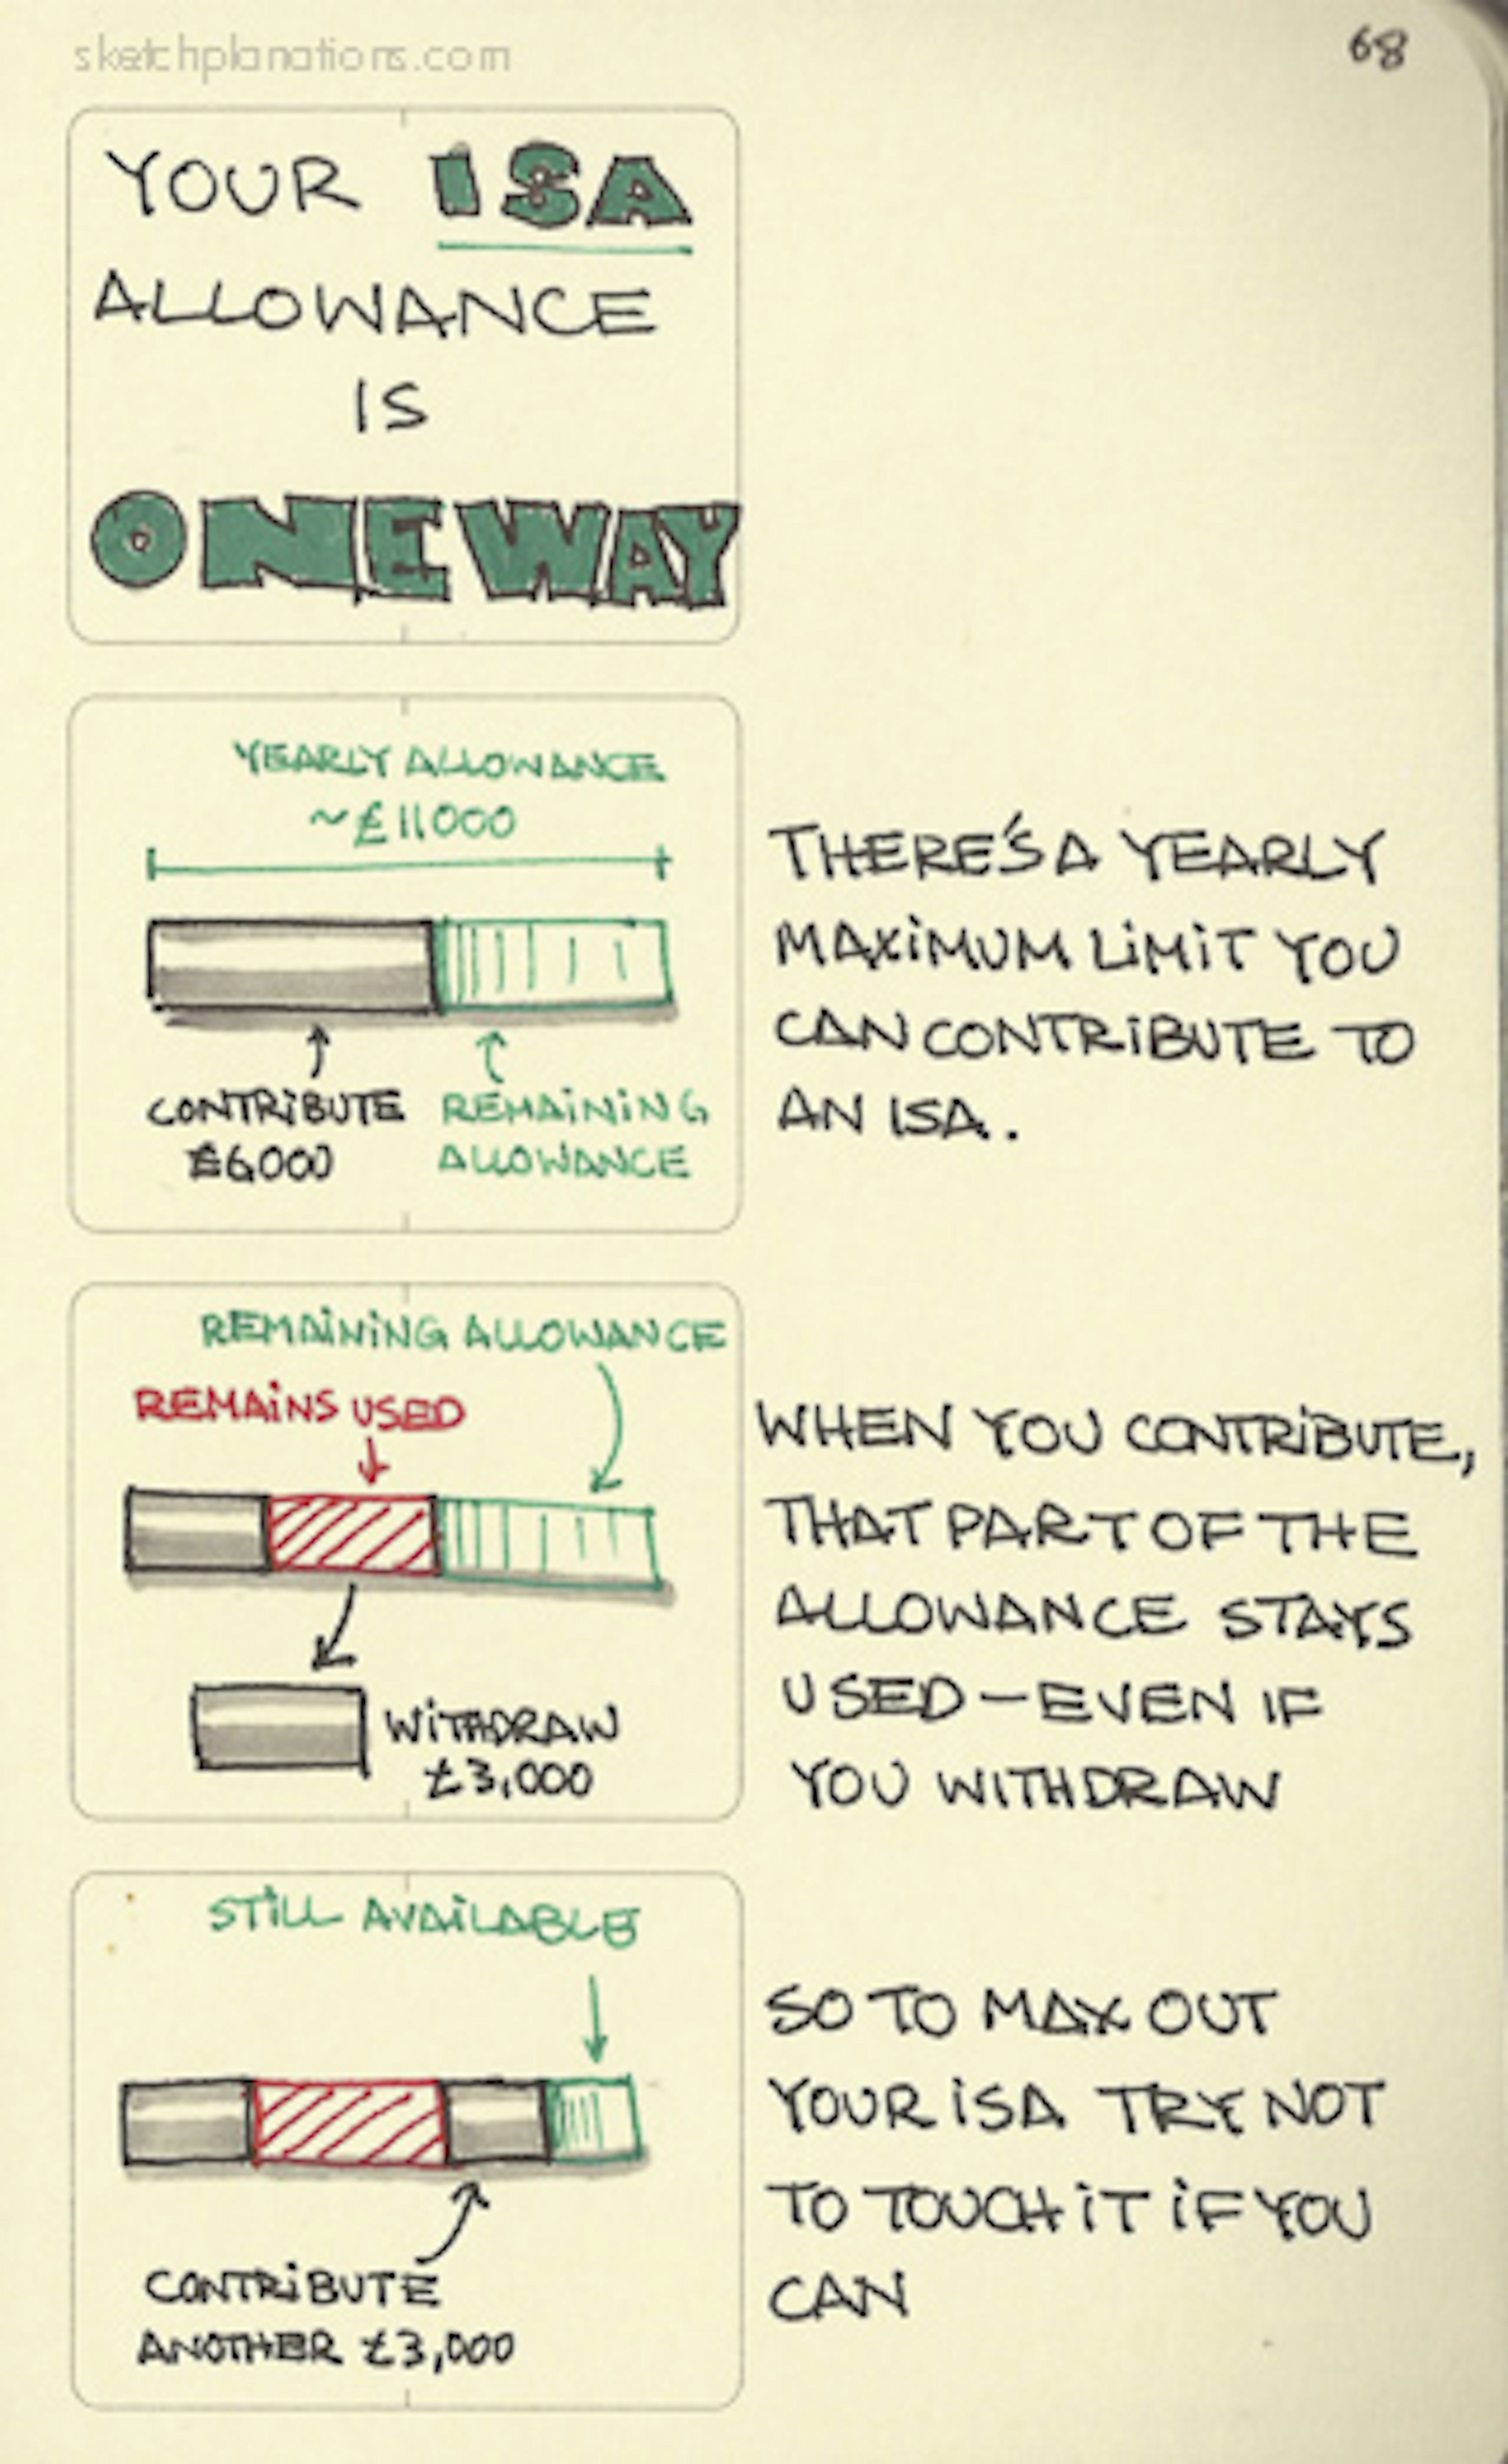 Your ISA allowance is one-way - Sketchplanations